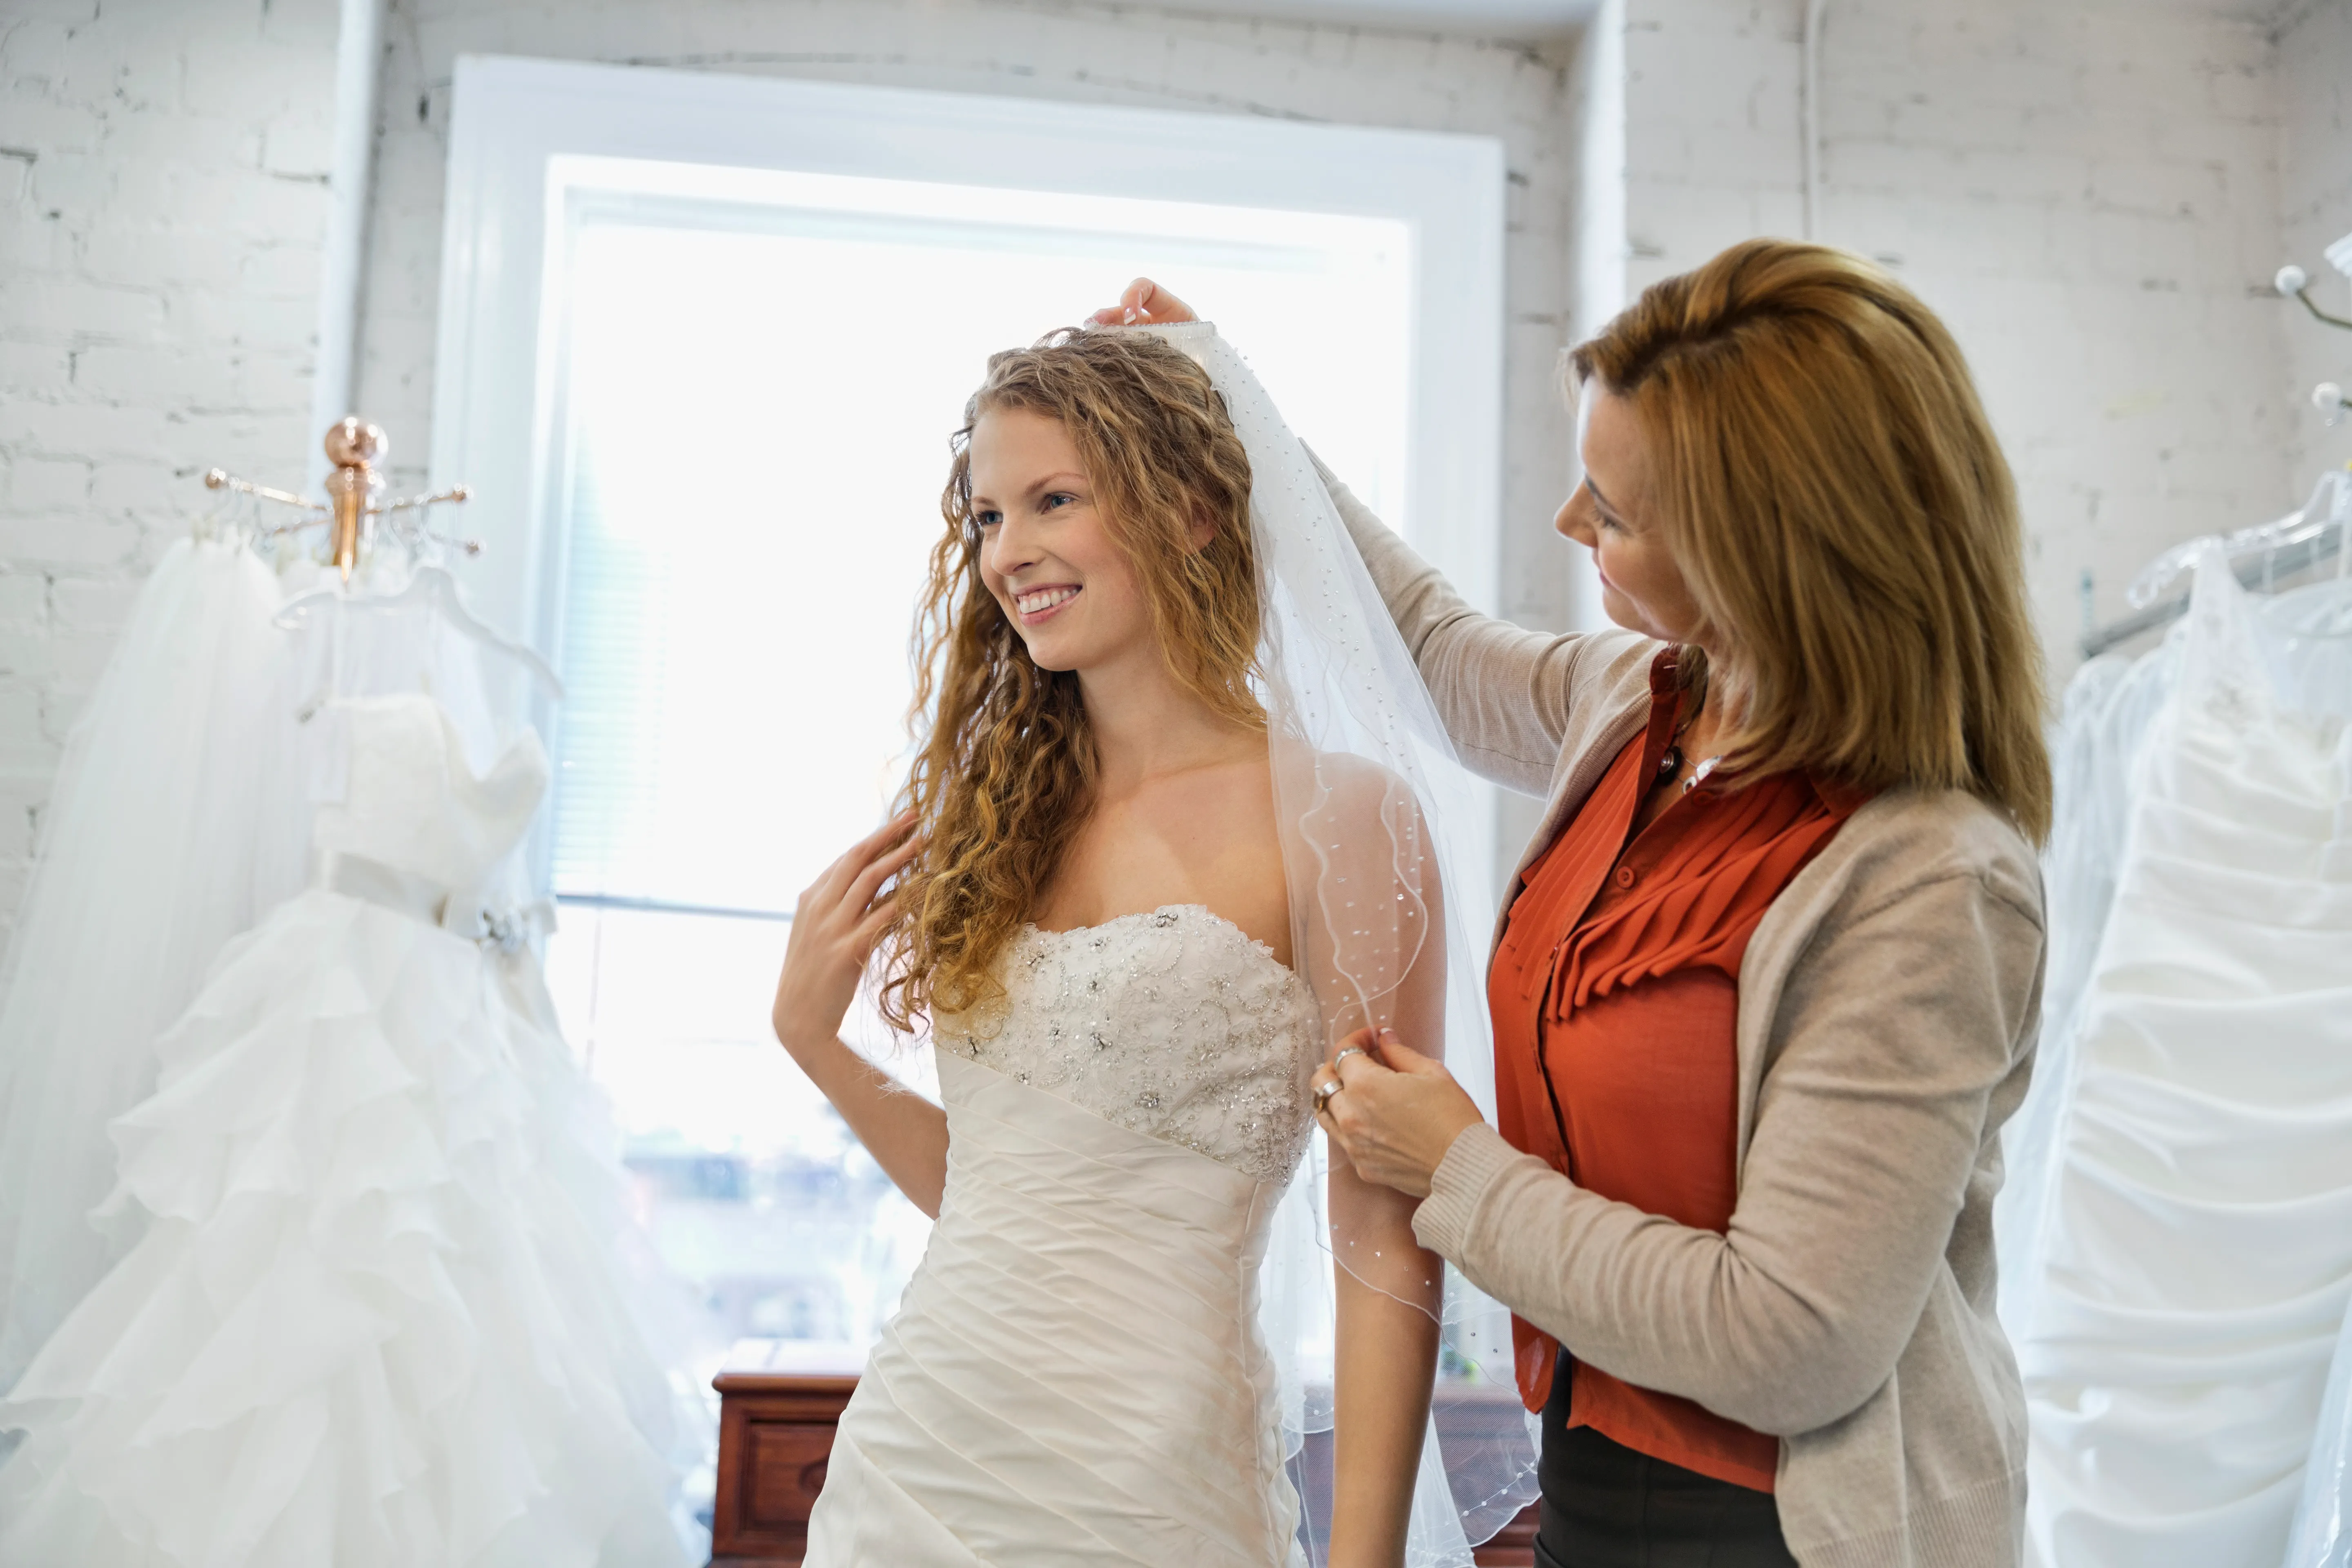 How to Tell Your Kid You Can't Afford to Pay for Her Dream Wedding